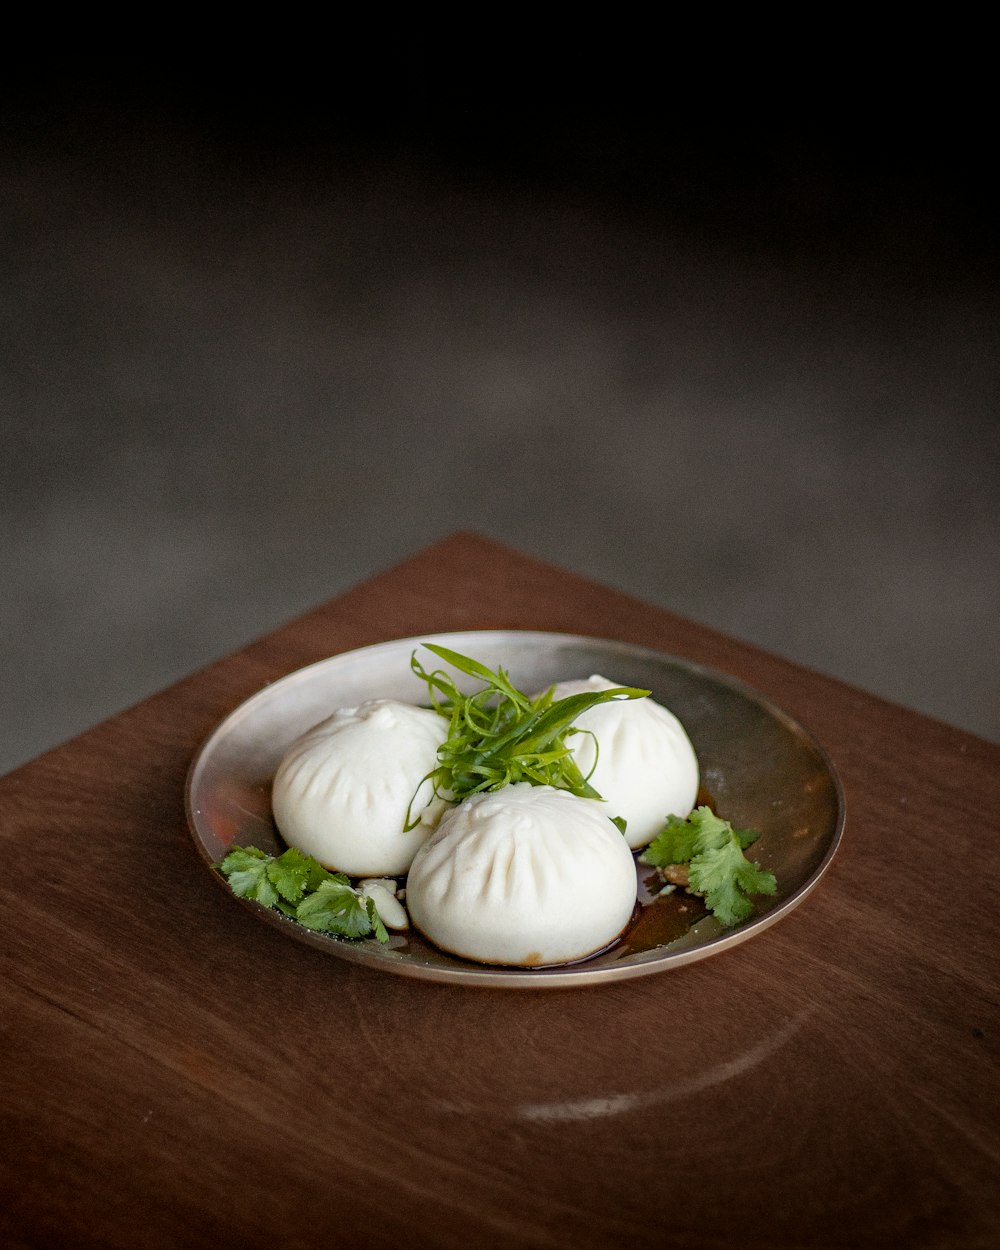 a plate of dumplings on a wooden table